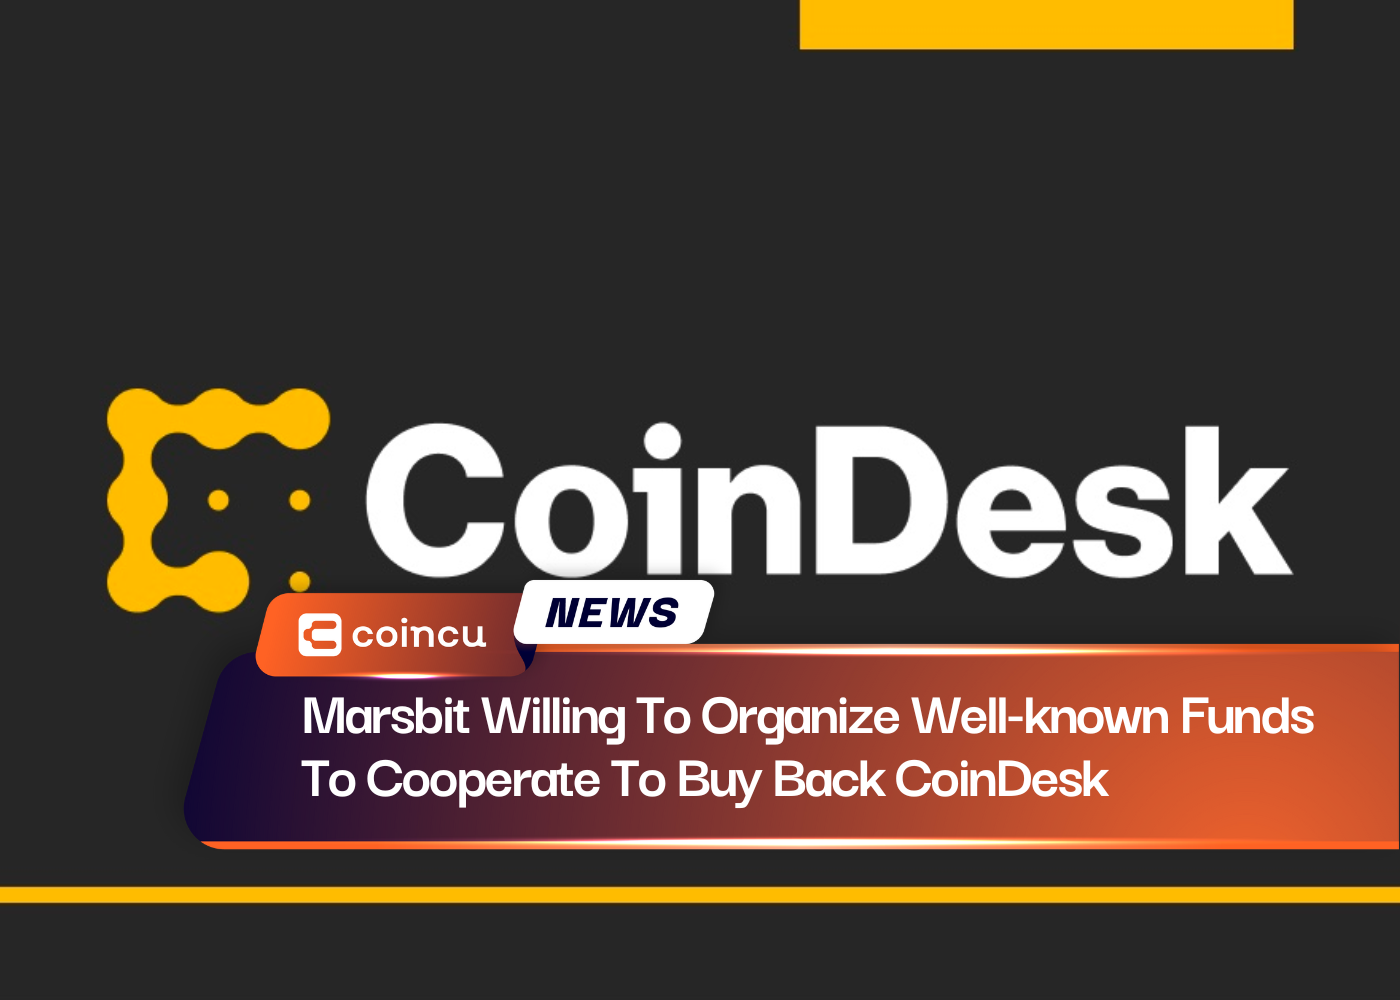 Marsbit Willing To Organize Well-known Funds To Cooperate To Buy Back CoinDesk